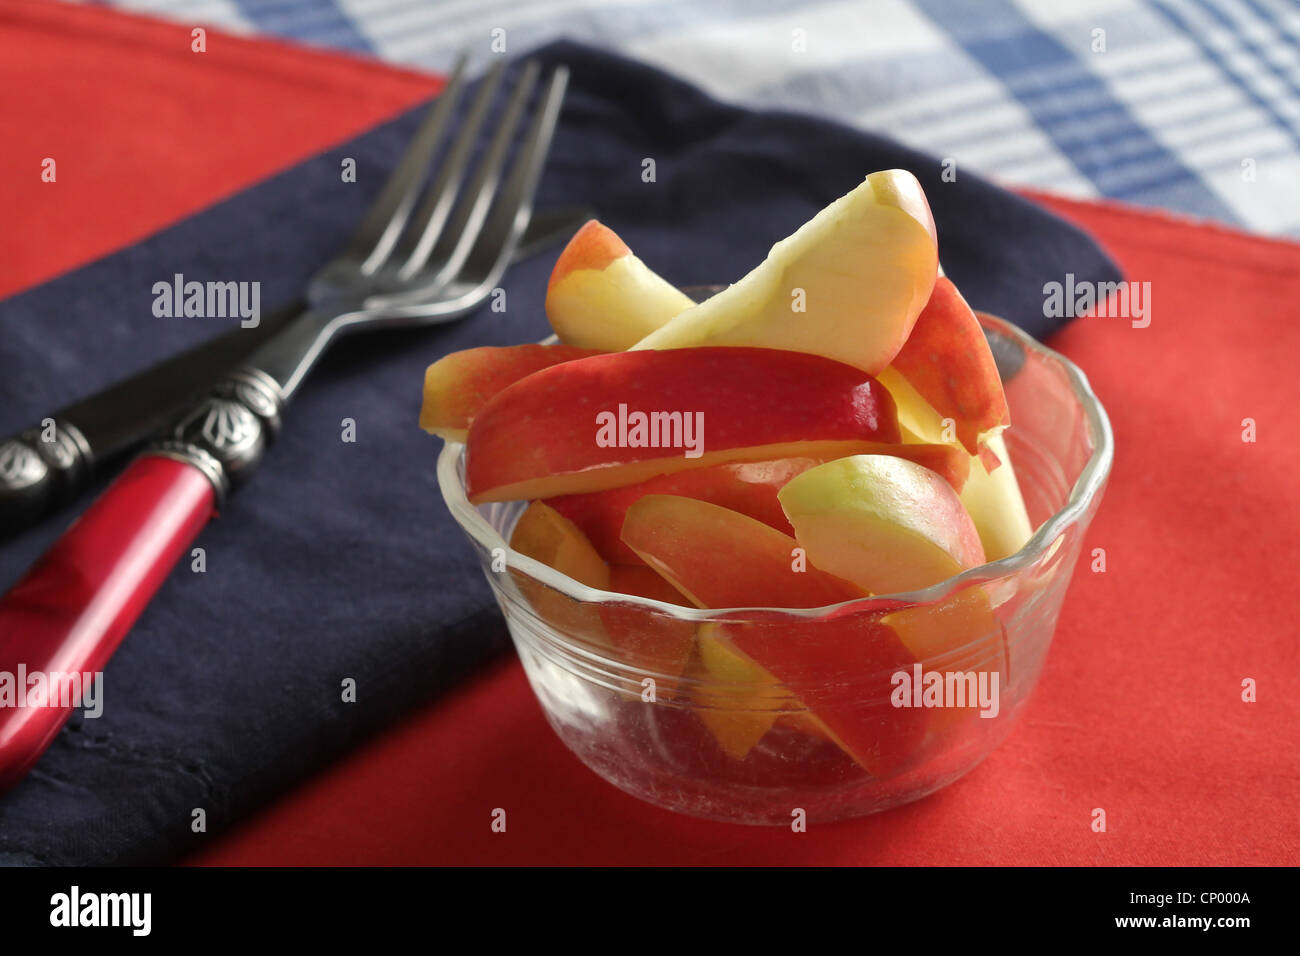 A glass bowl of sliced red apples on a red place mat, with a blue napkin, and a striped blue tablecloth. Stock Photo